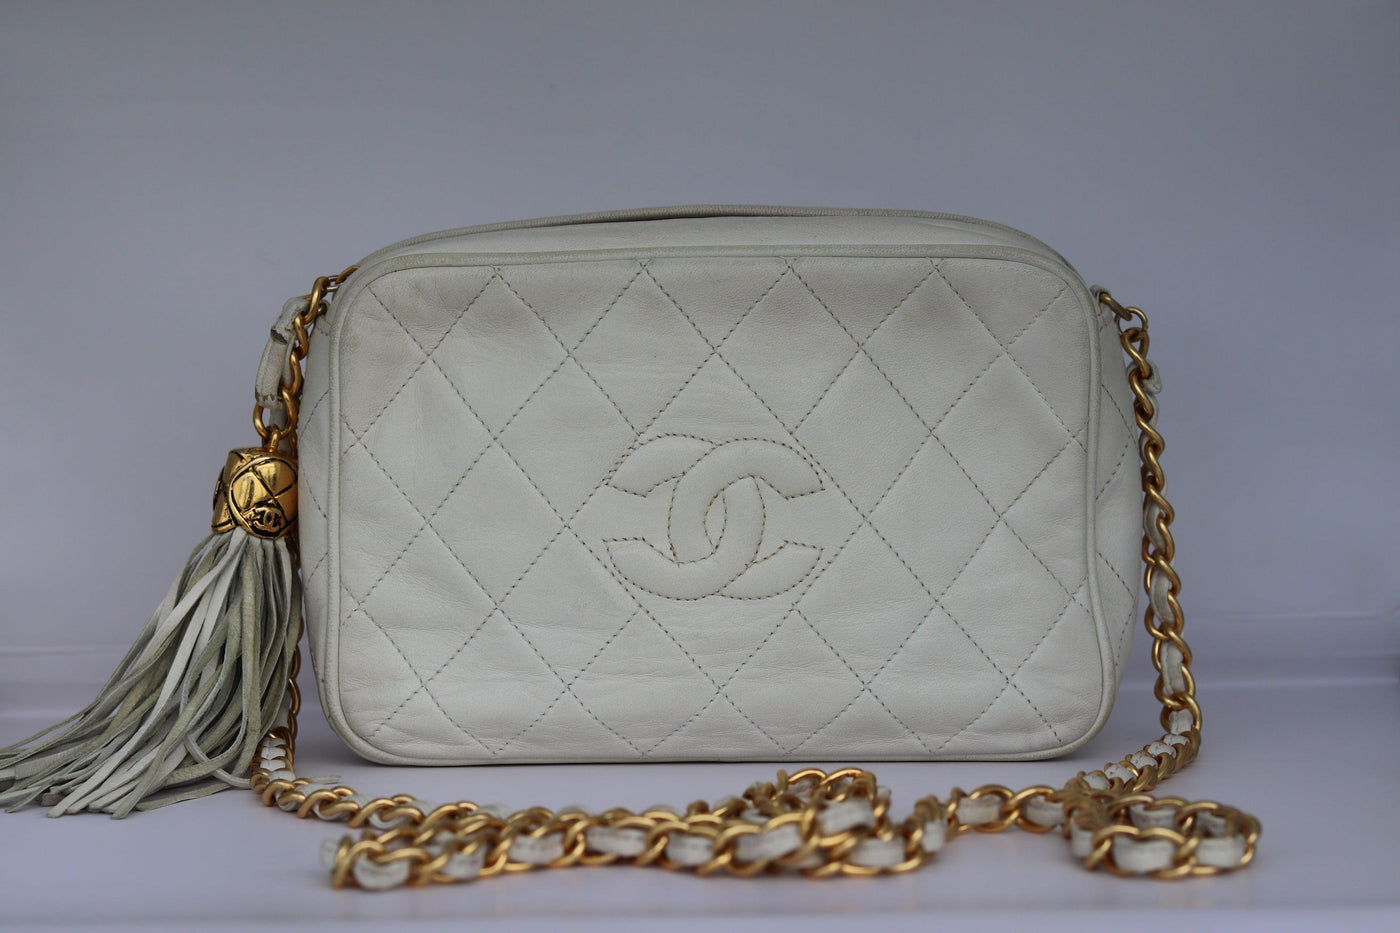 Chanel White Quilted Leather Diamond Bag Chanel